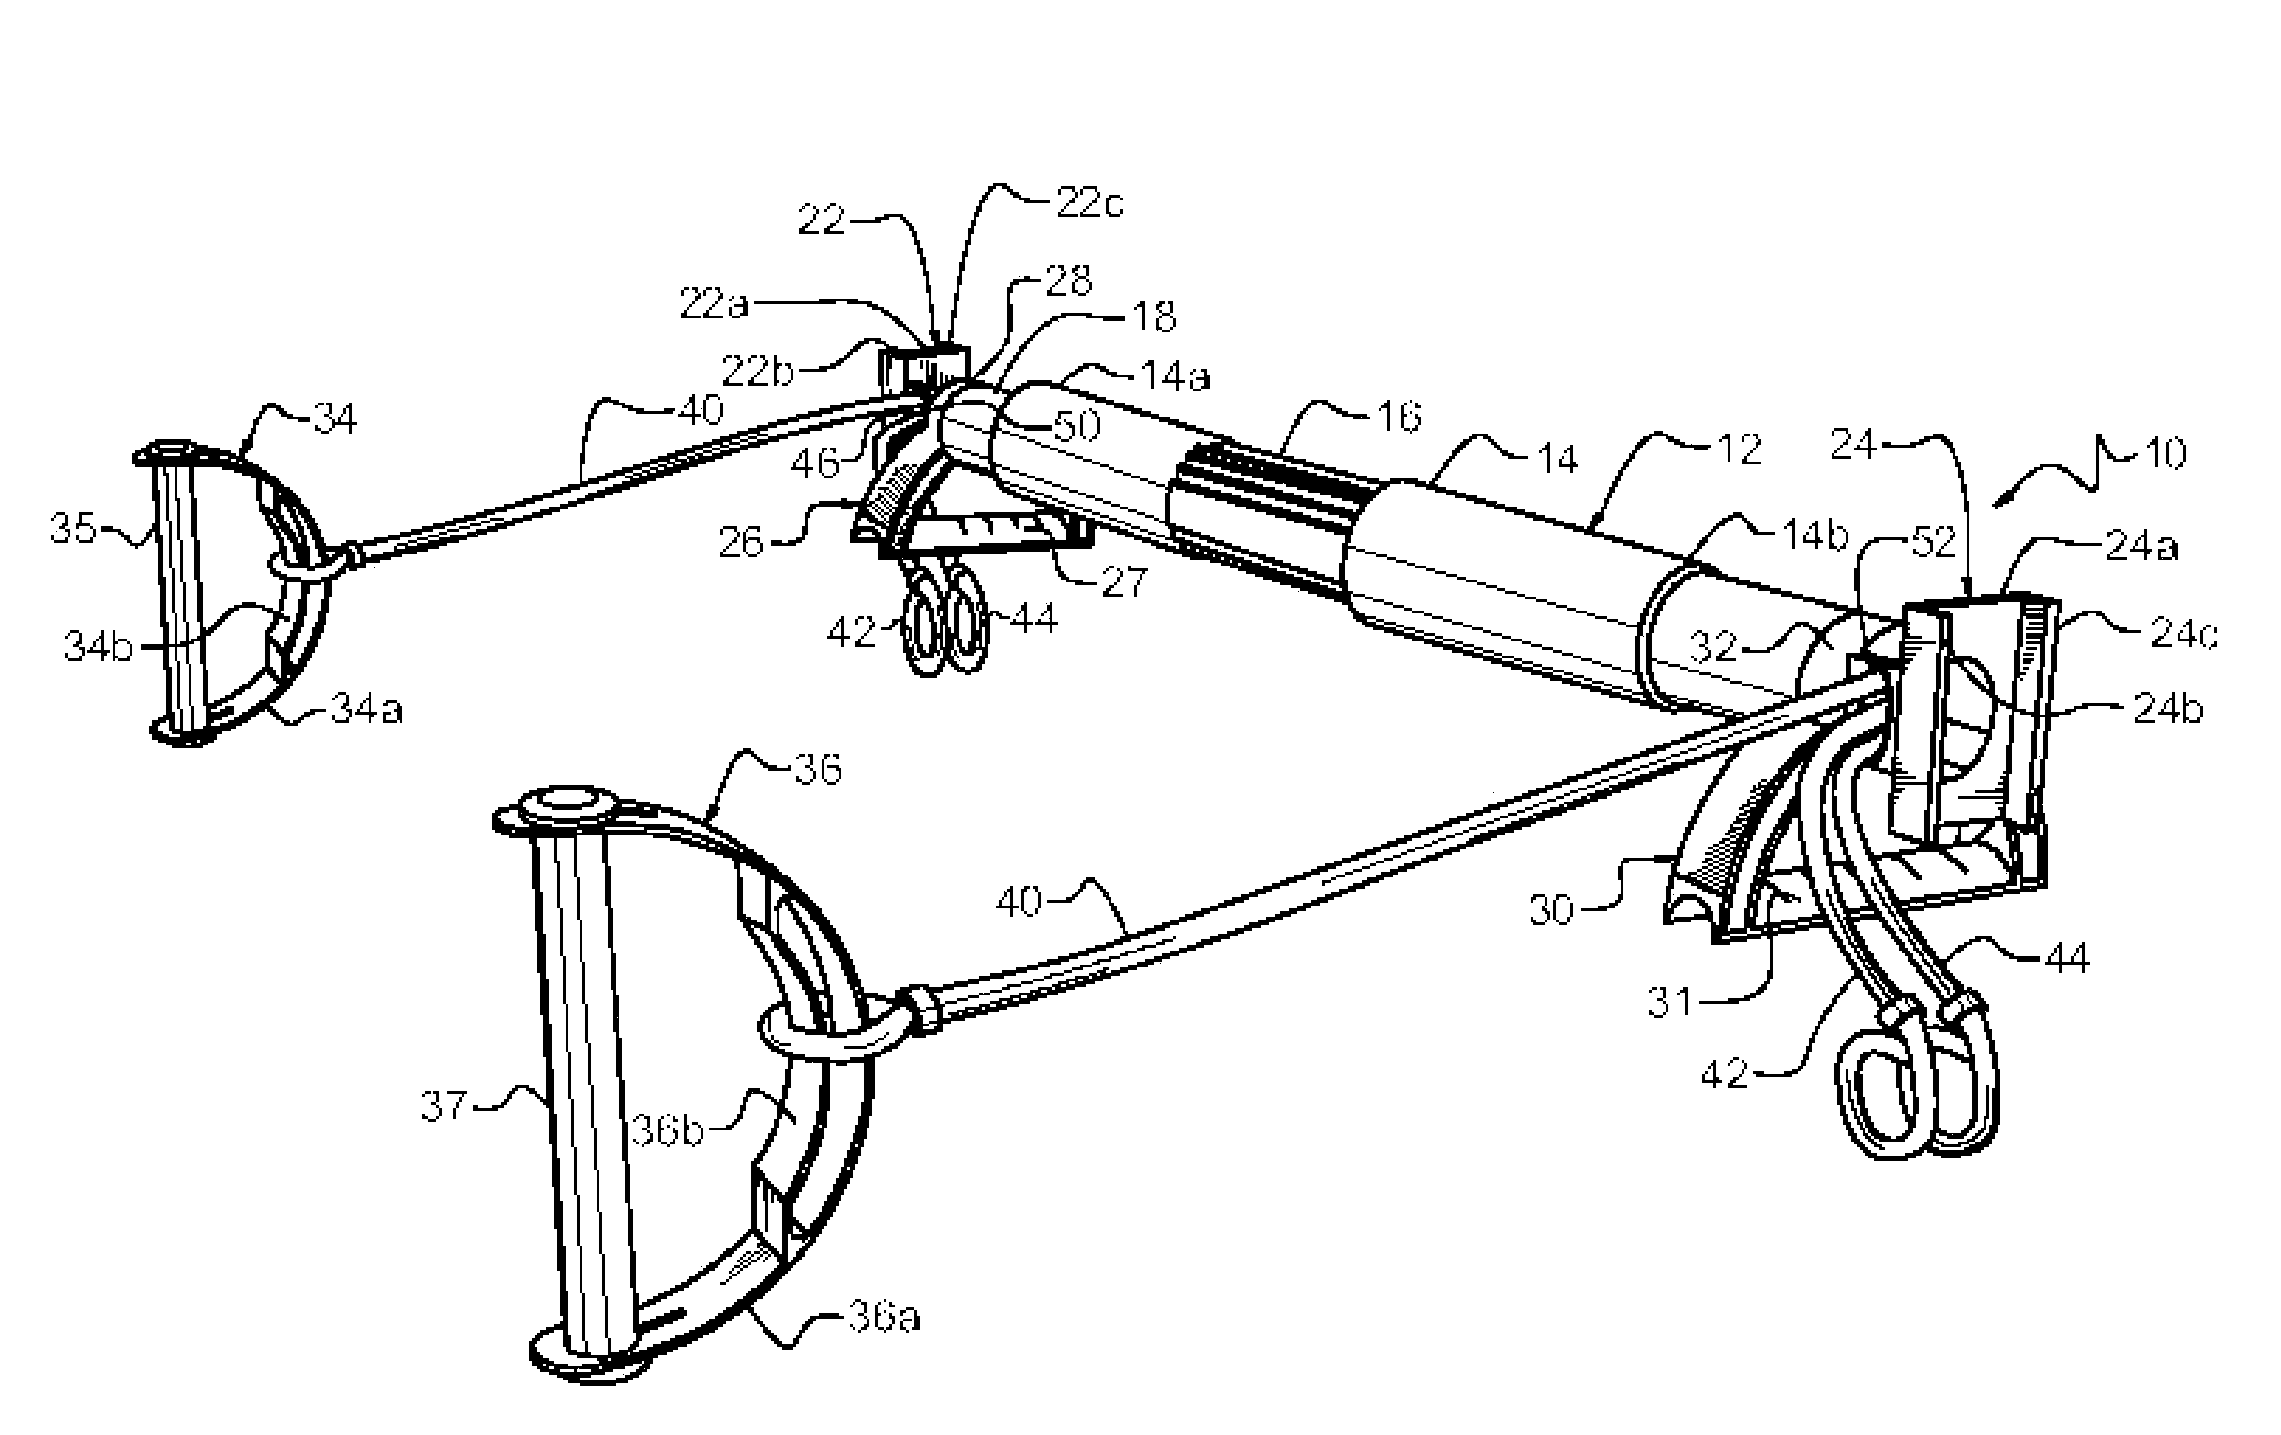 Doorway-mounted exercise device with resistance bands